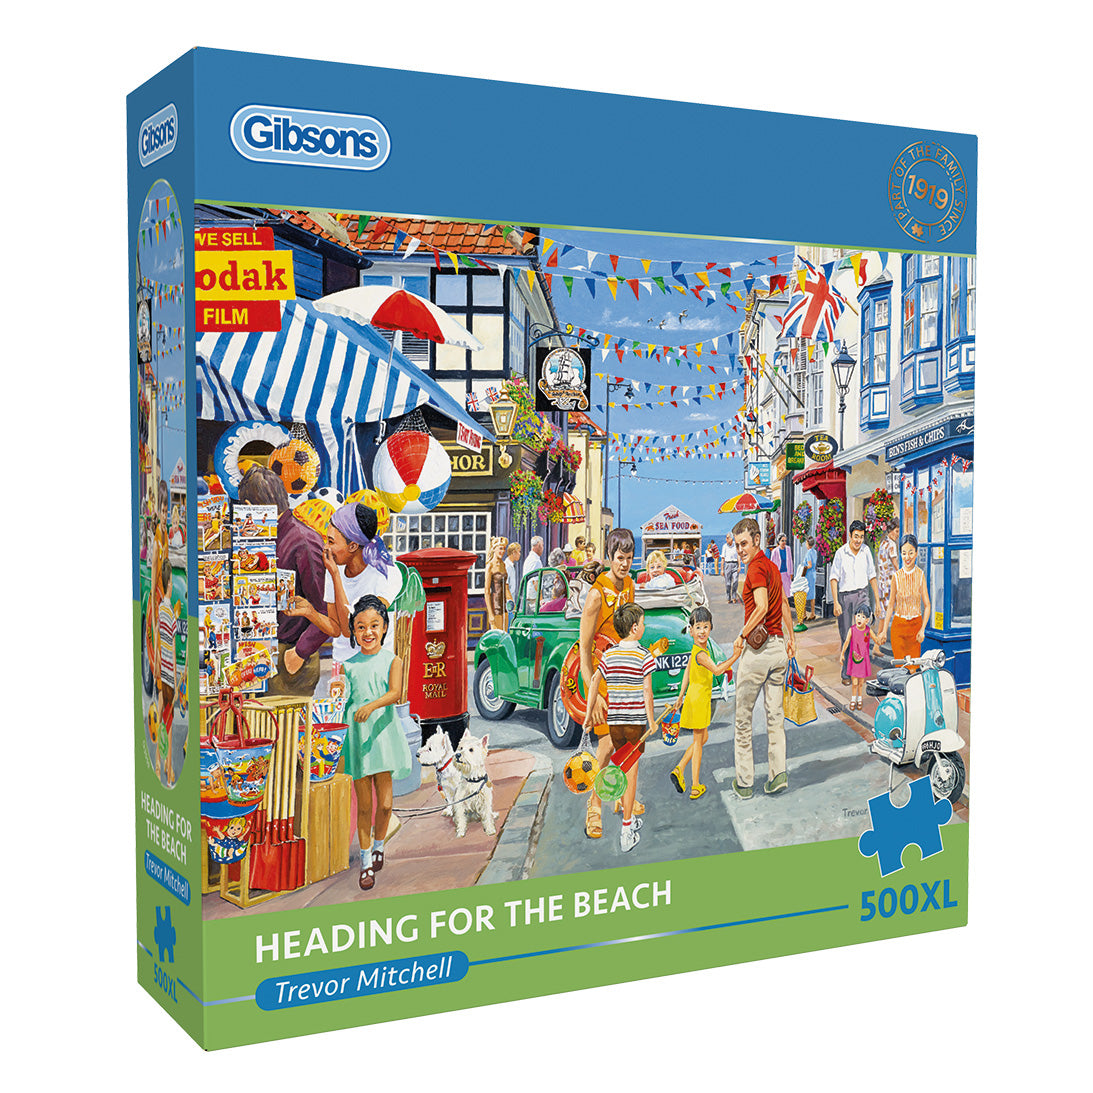 Gibsons - Heading for the Beach - 500 XL Piece Jigsaw Puzzle